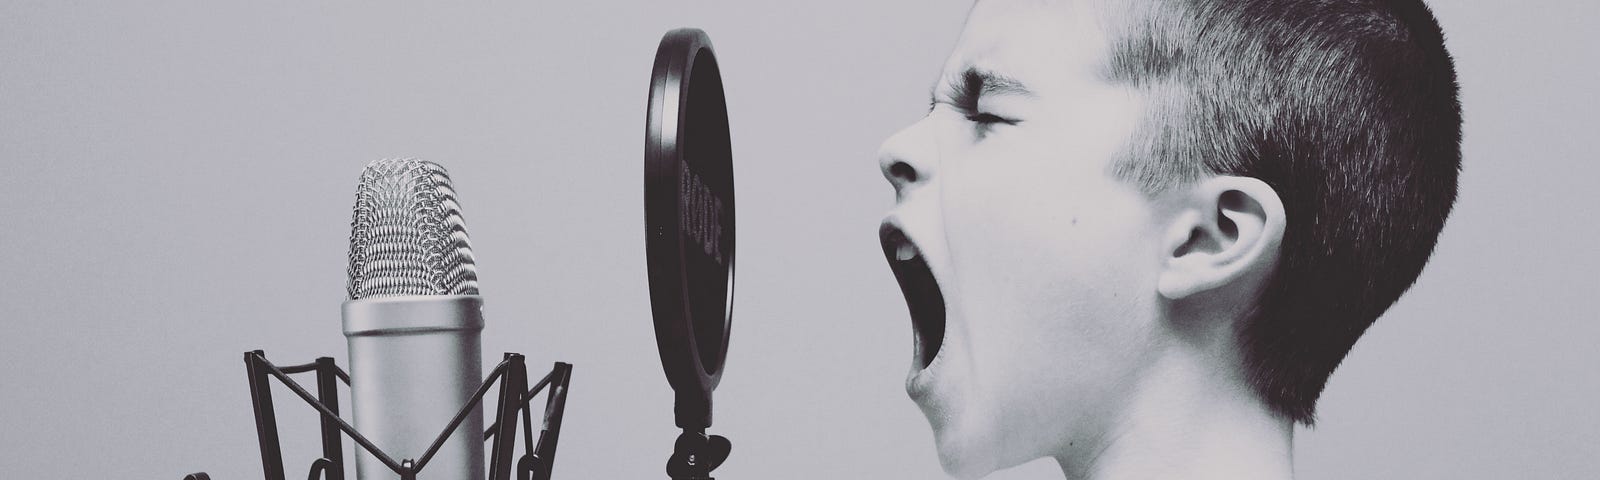 Boy singing into microphone